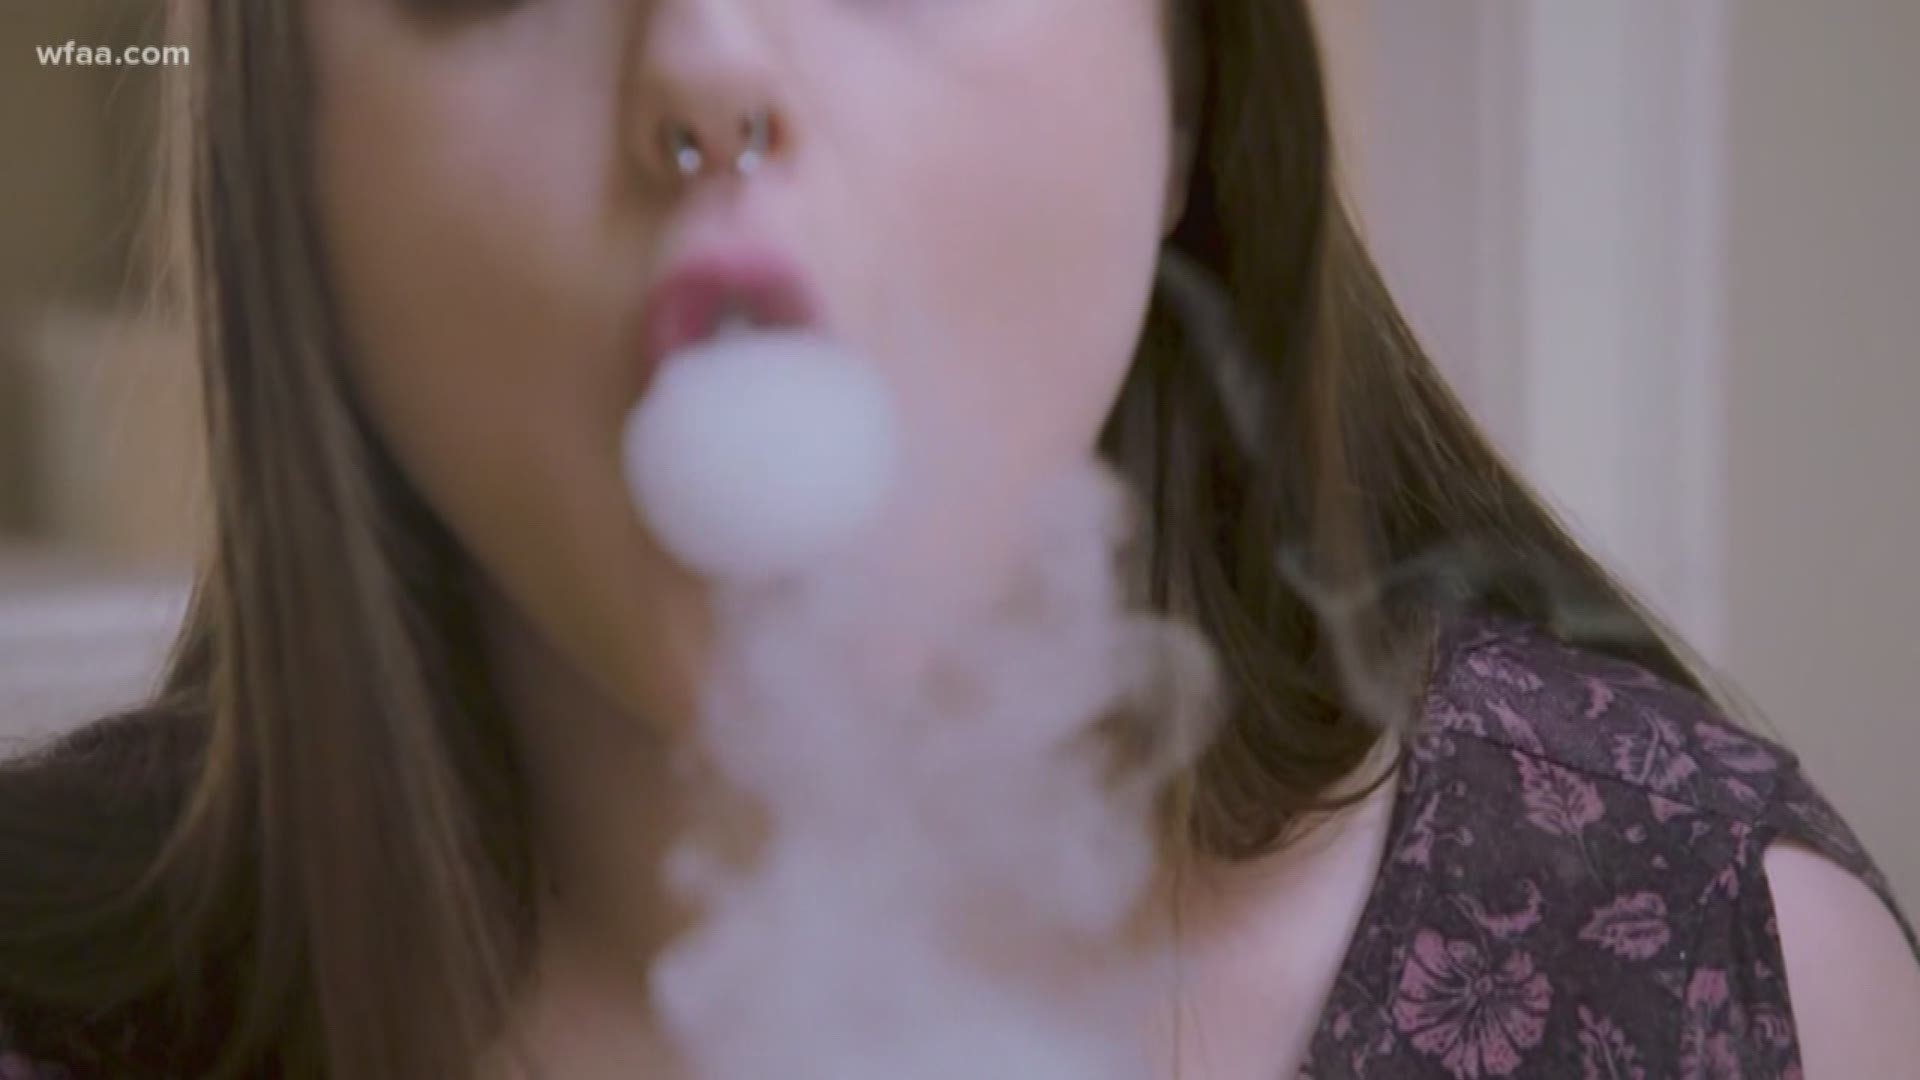 A bipartisan bill cosponsored by 26 senators from 23 states aims to stop e-cigarette vendors from selling to teens online.